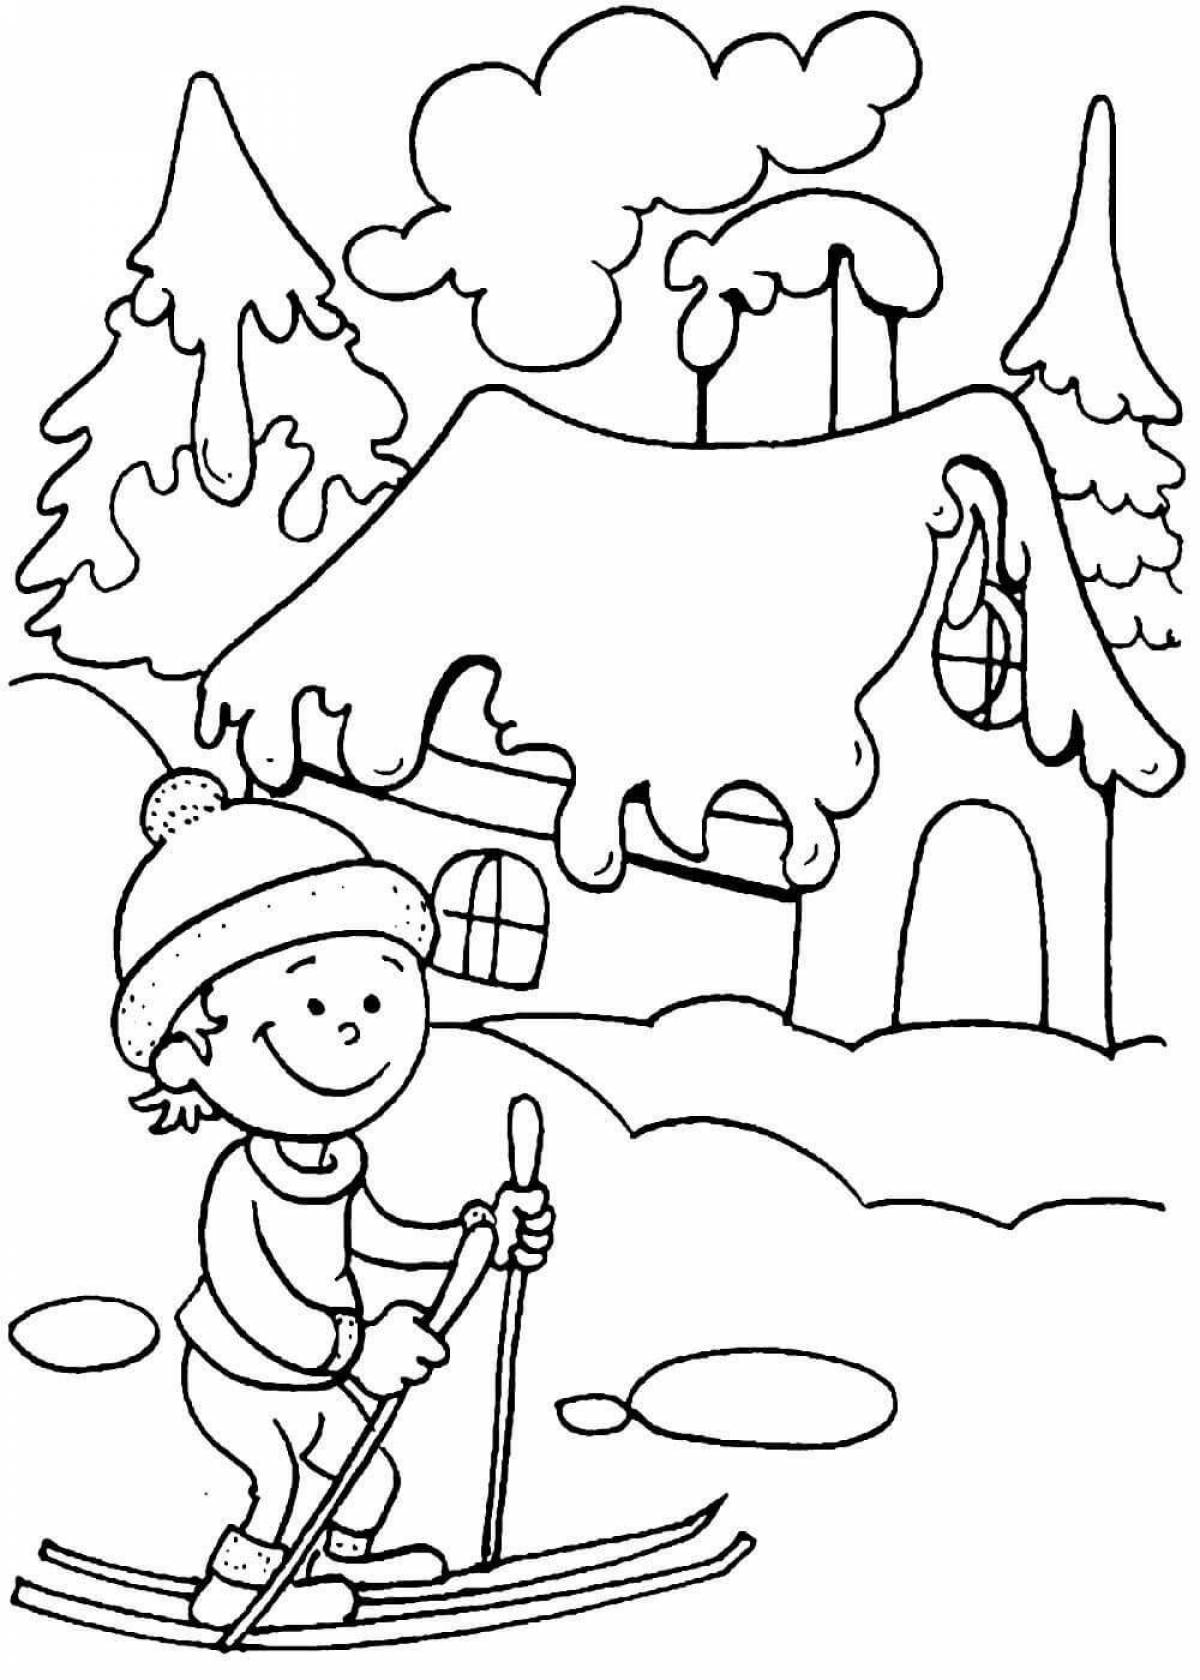 A fascinating winter landscape coloring book for children 6-7 years old